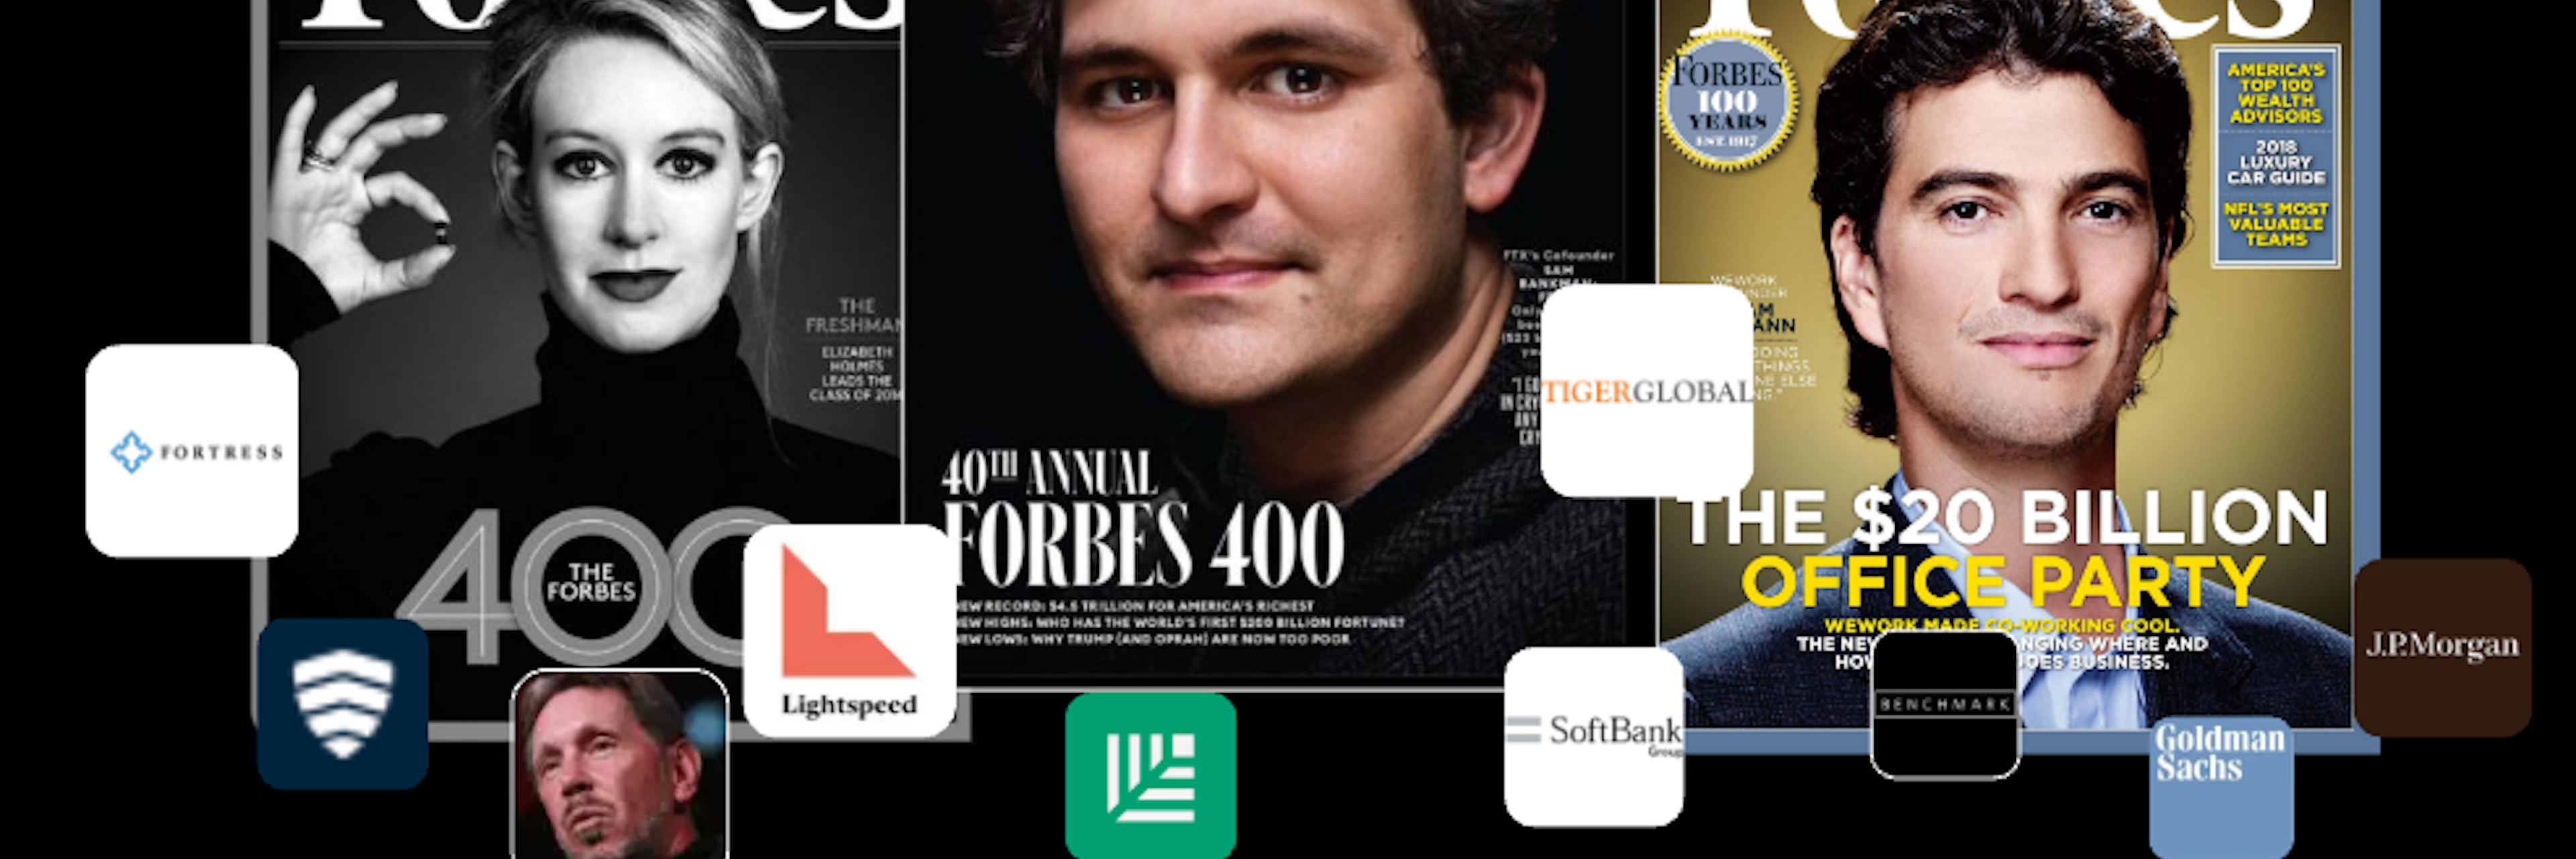 A collage of Forbes covers showing Elizabeth Holmes, Sam Bankman-Fried and Adam Neumann. Credit:Francesco Perticarari